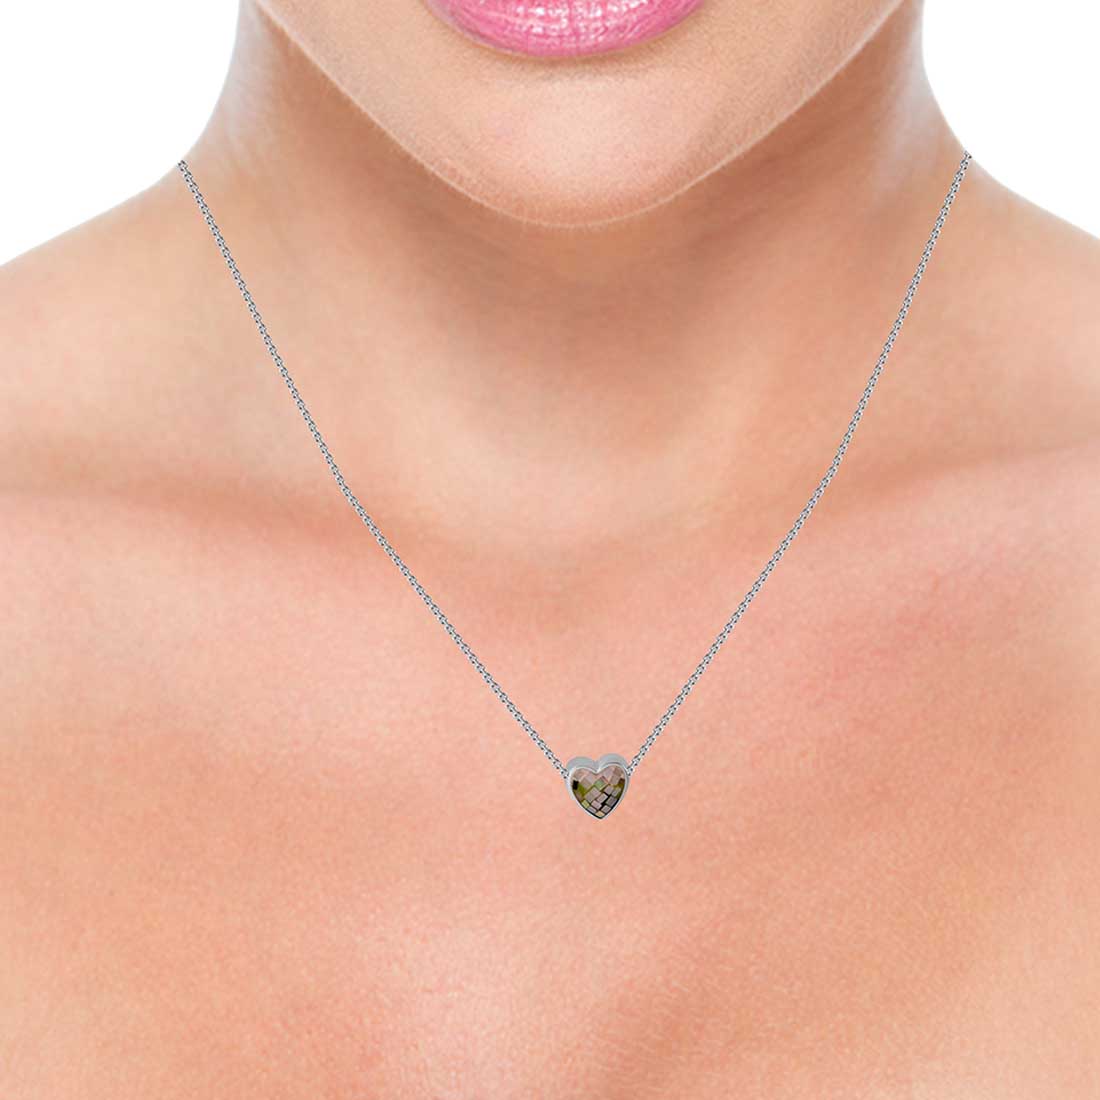 Heart Pendant With Chain For Women & Girls